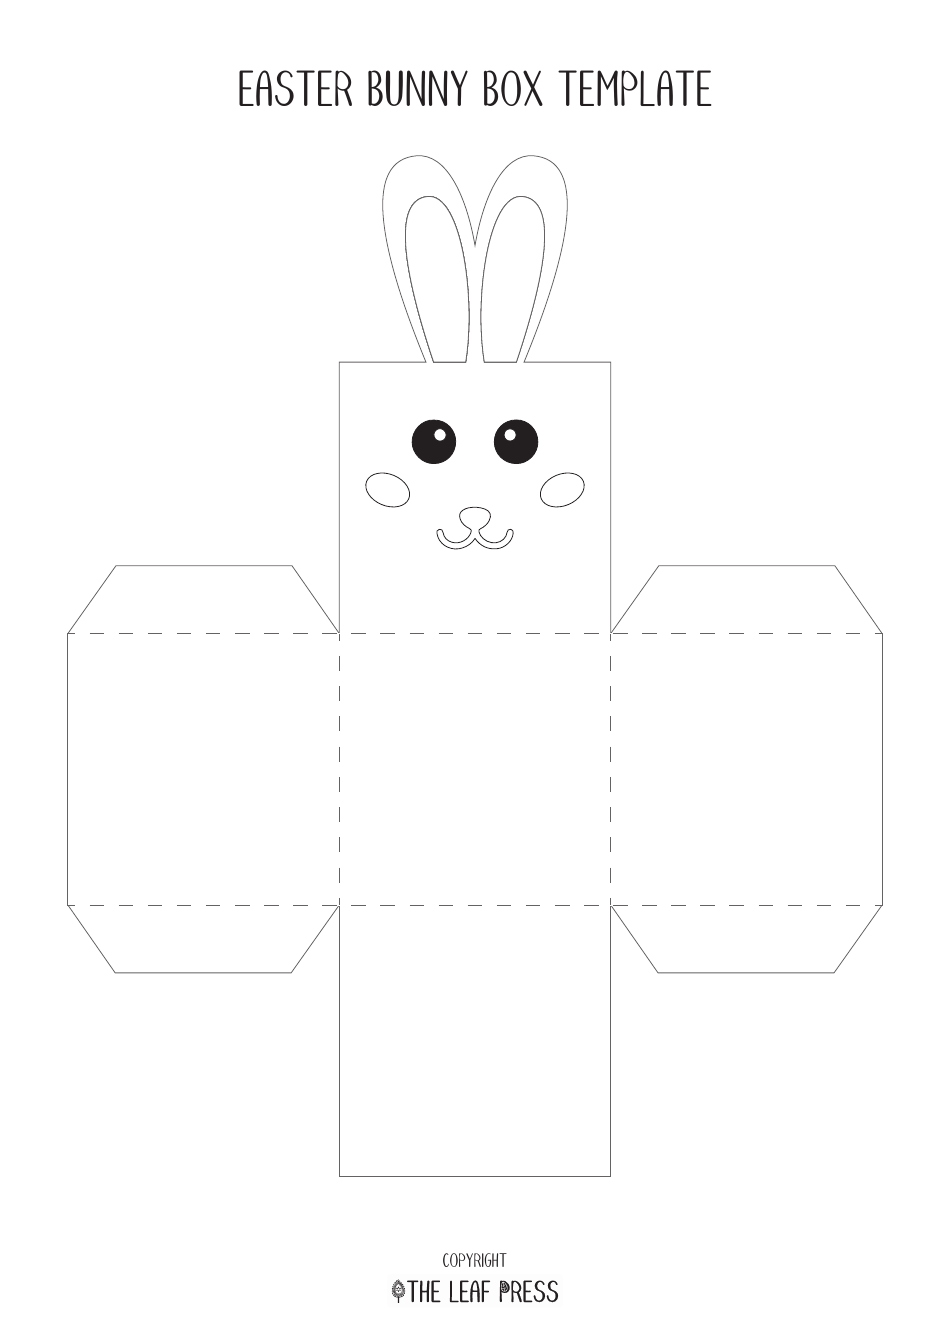 Coloring Easter Bunny Box Template, Page 1